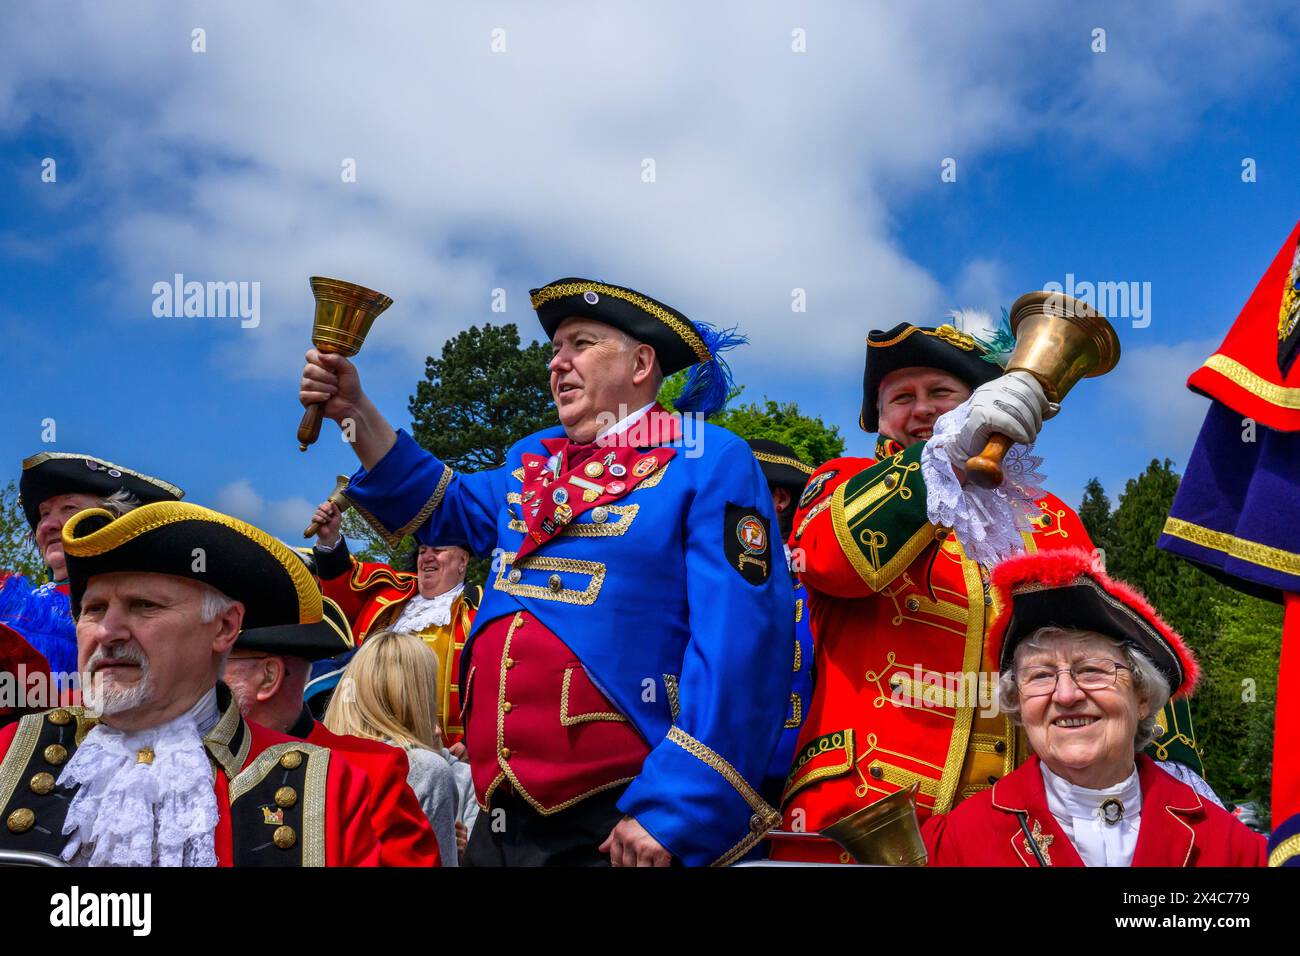 Town criers (bellmen & bellwomen in colourful braided crier's livery & uniforms) standing in group, smile & pose - Ilkley, West Yorkshire, England UK. Stock Photo